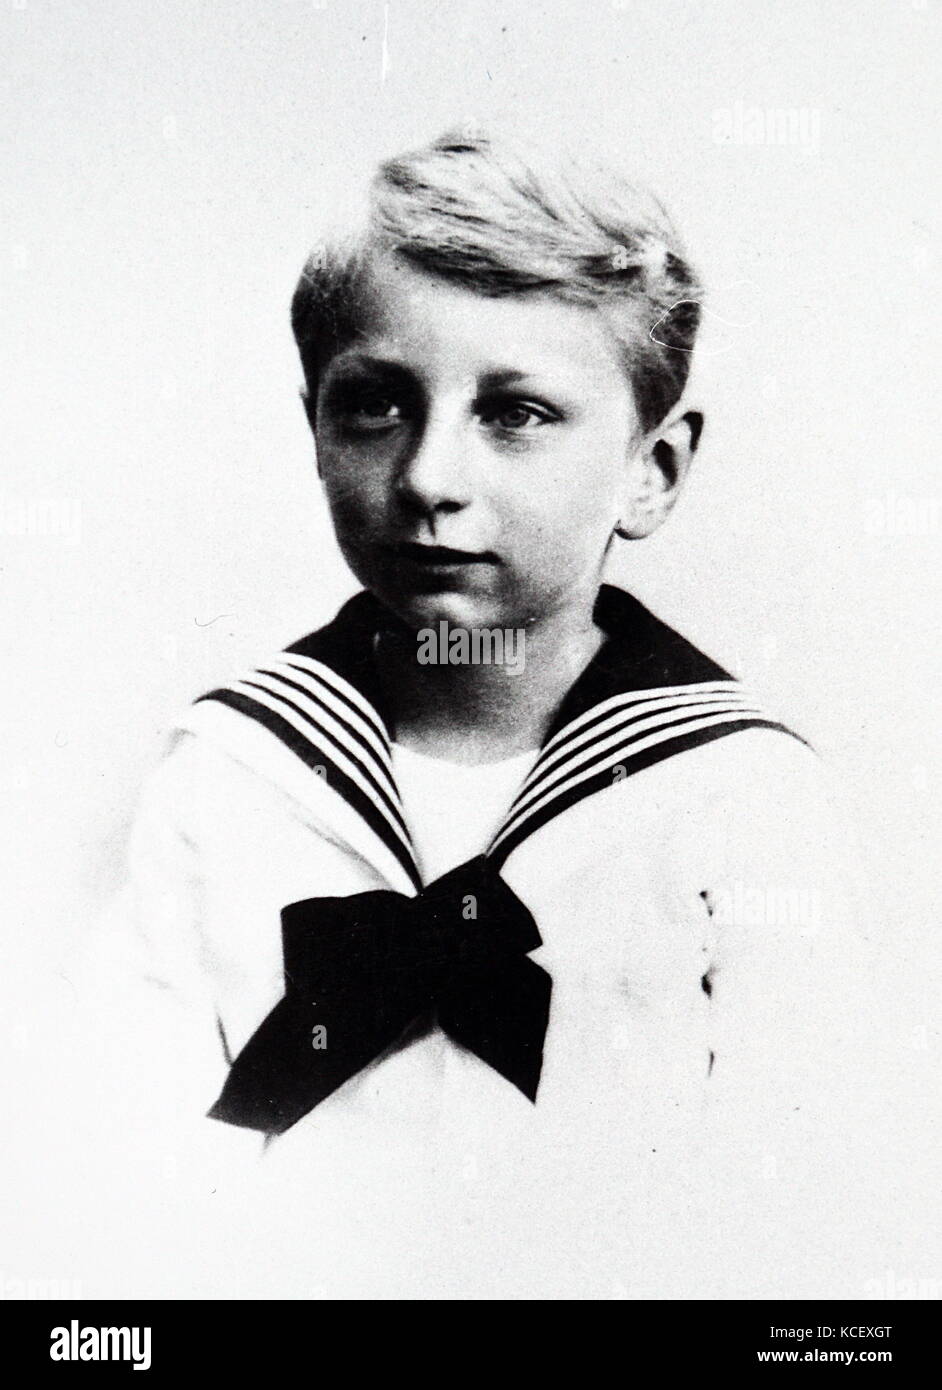 Photograph of Prince Joachim Franz Humbert of Prussia (1890 – 1920) was the youngest son of Wilhelm II, German Emperor, by his first wife, Augusta Victoria of Schleswig-Holstein. Dated 19th Century Stock Photo